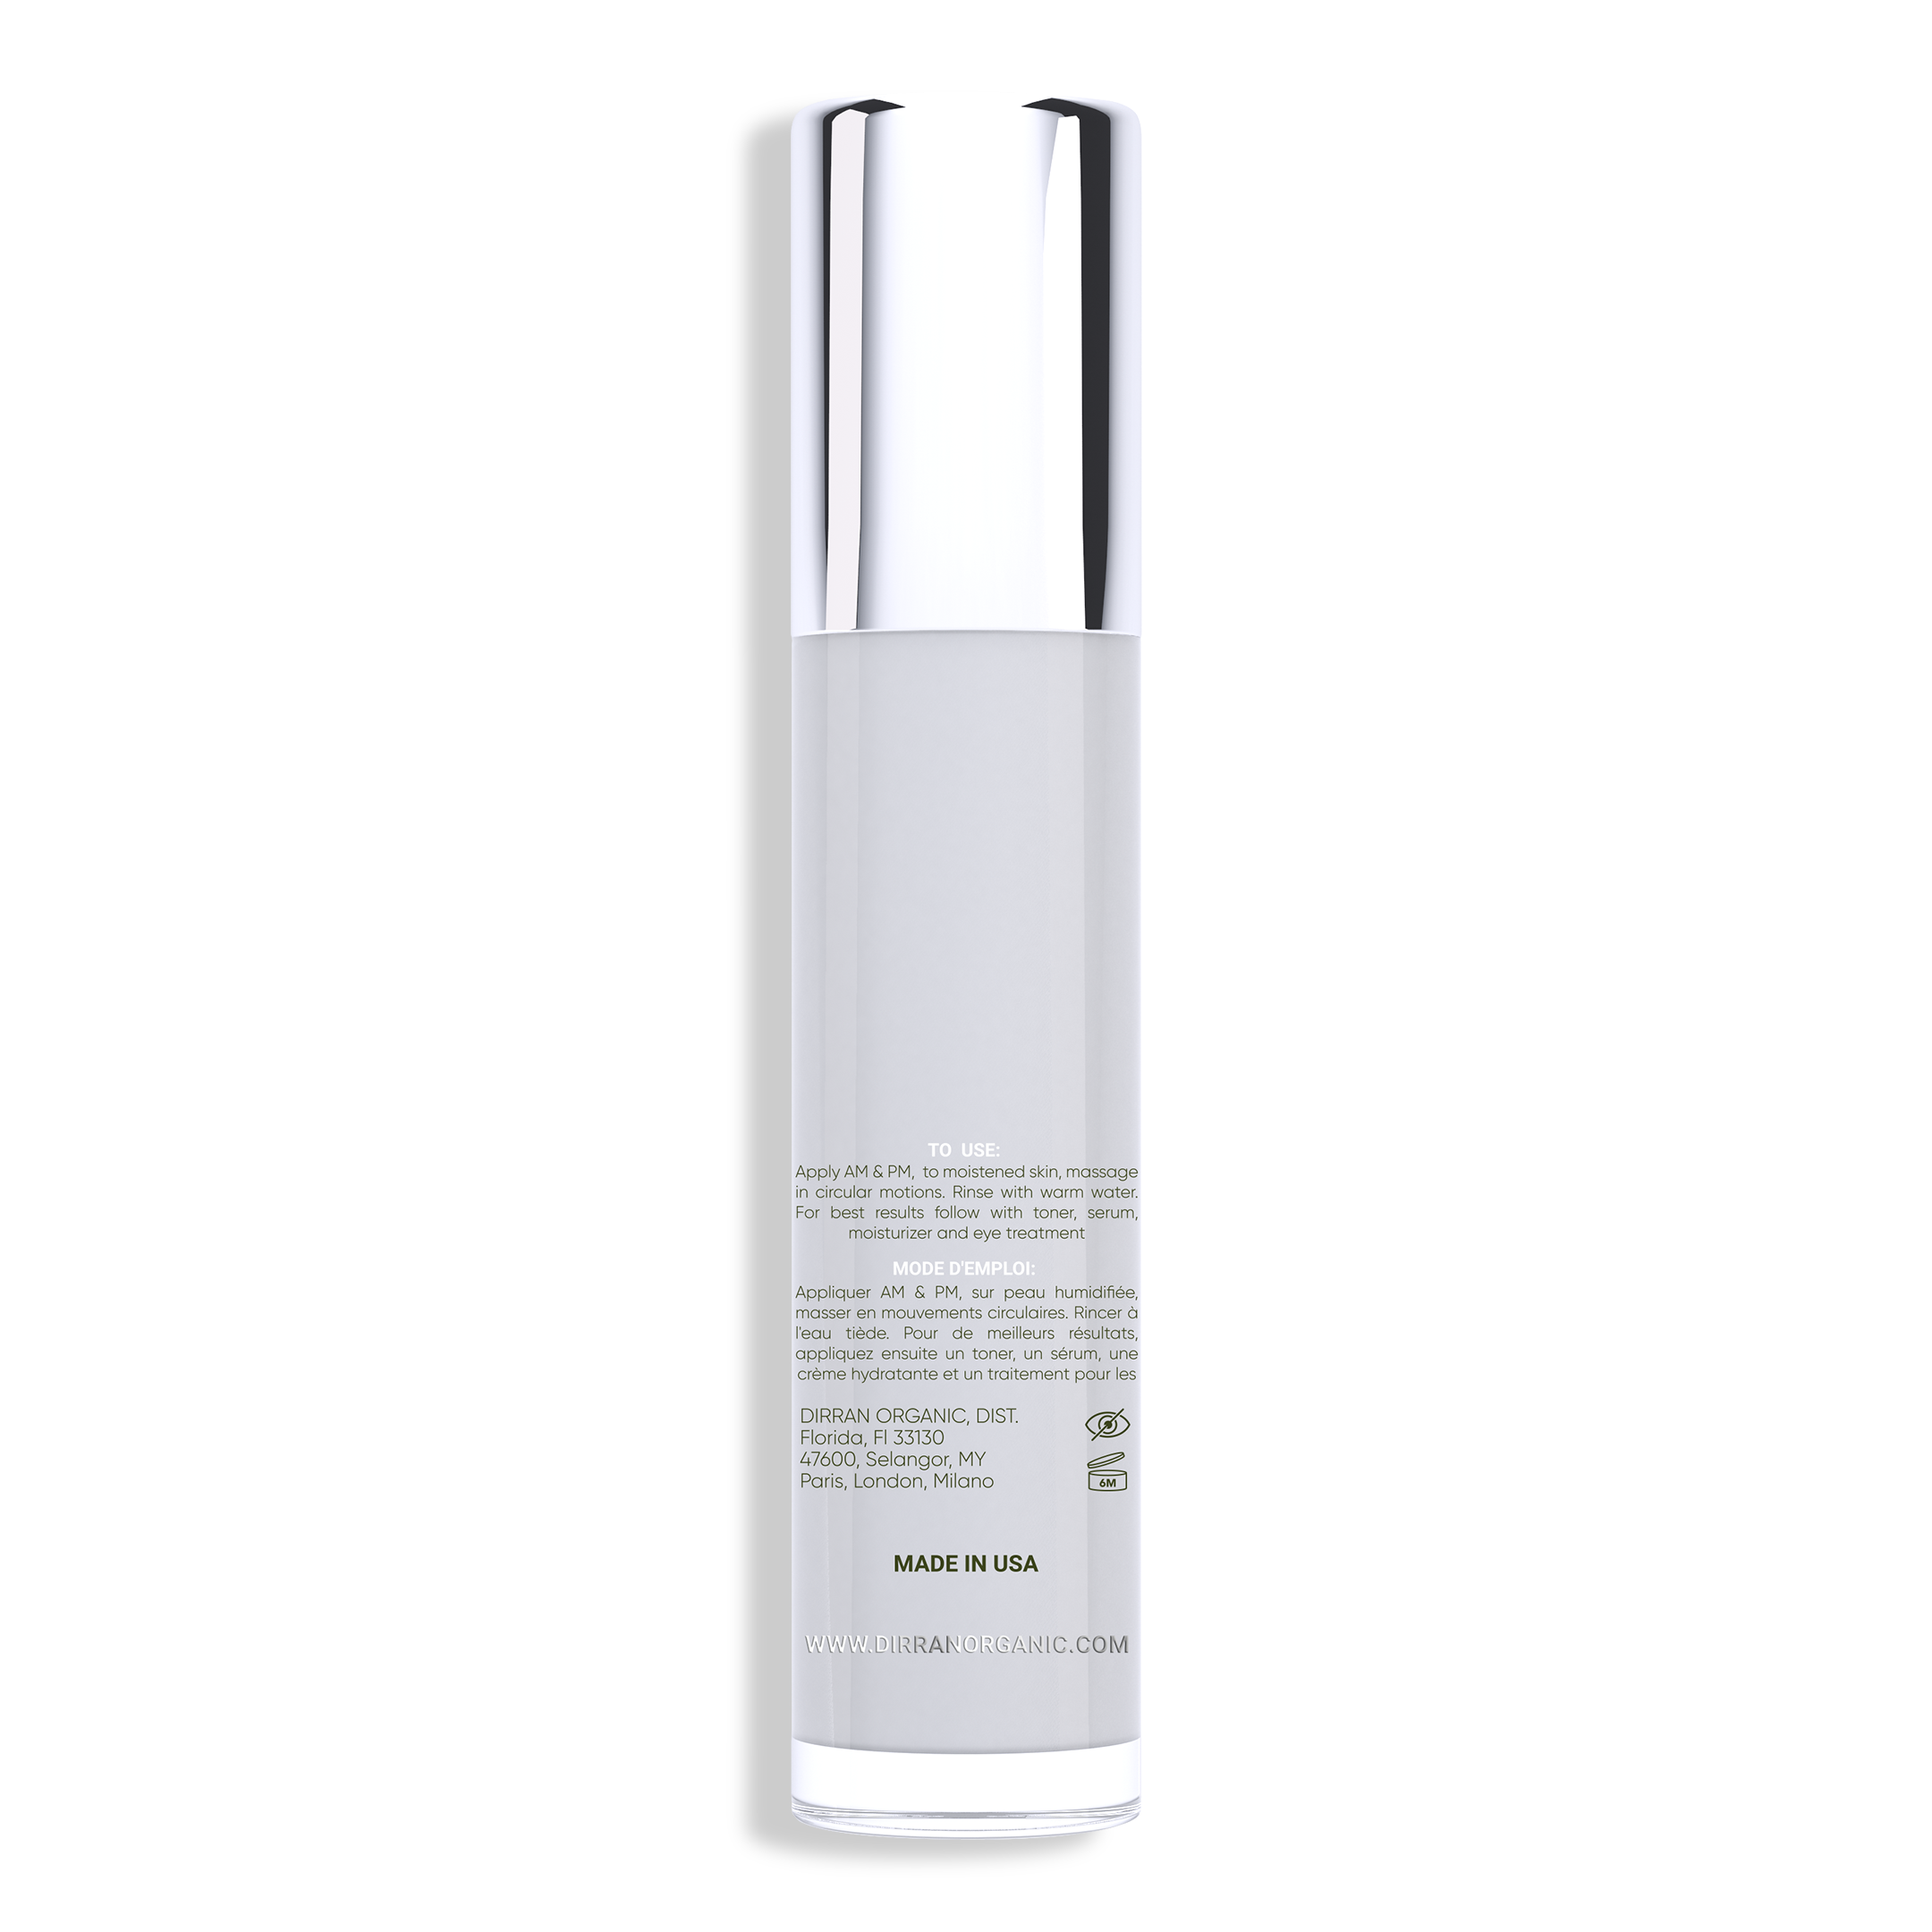 VITAMIN C CLEANSER Purifying Skin Texture